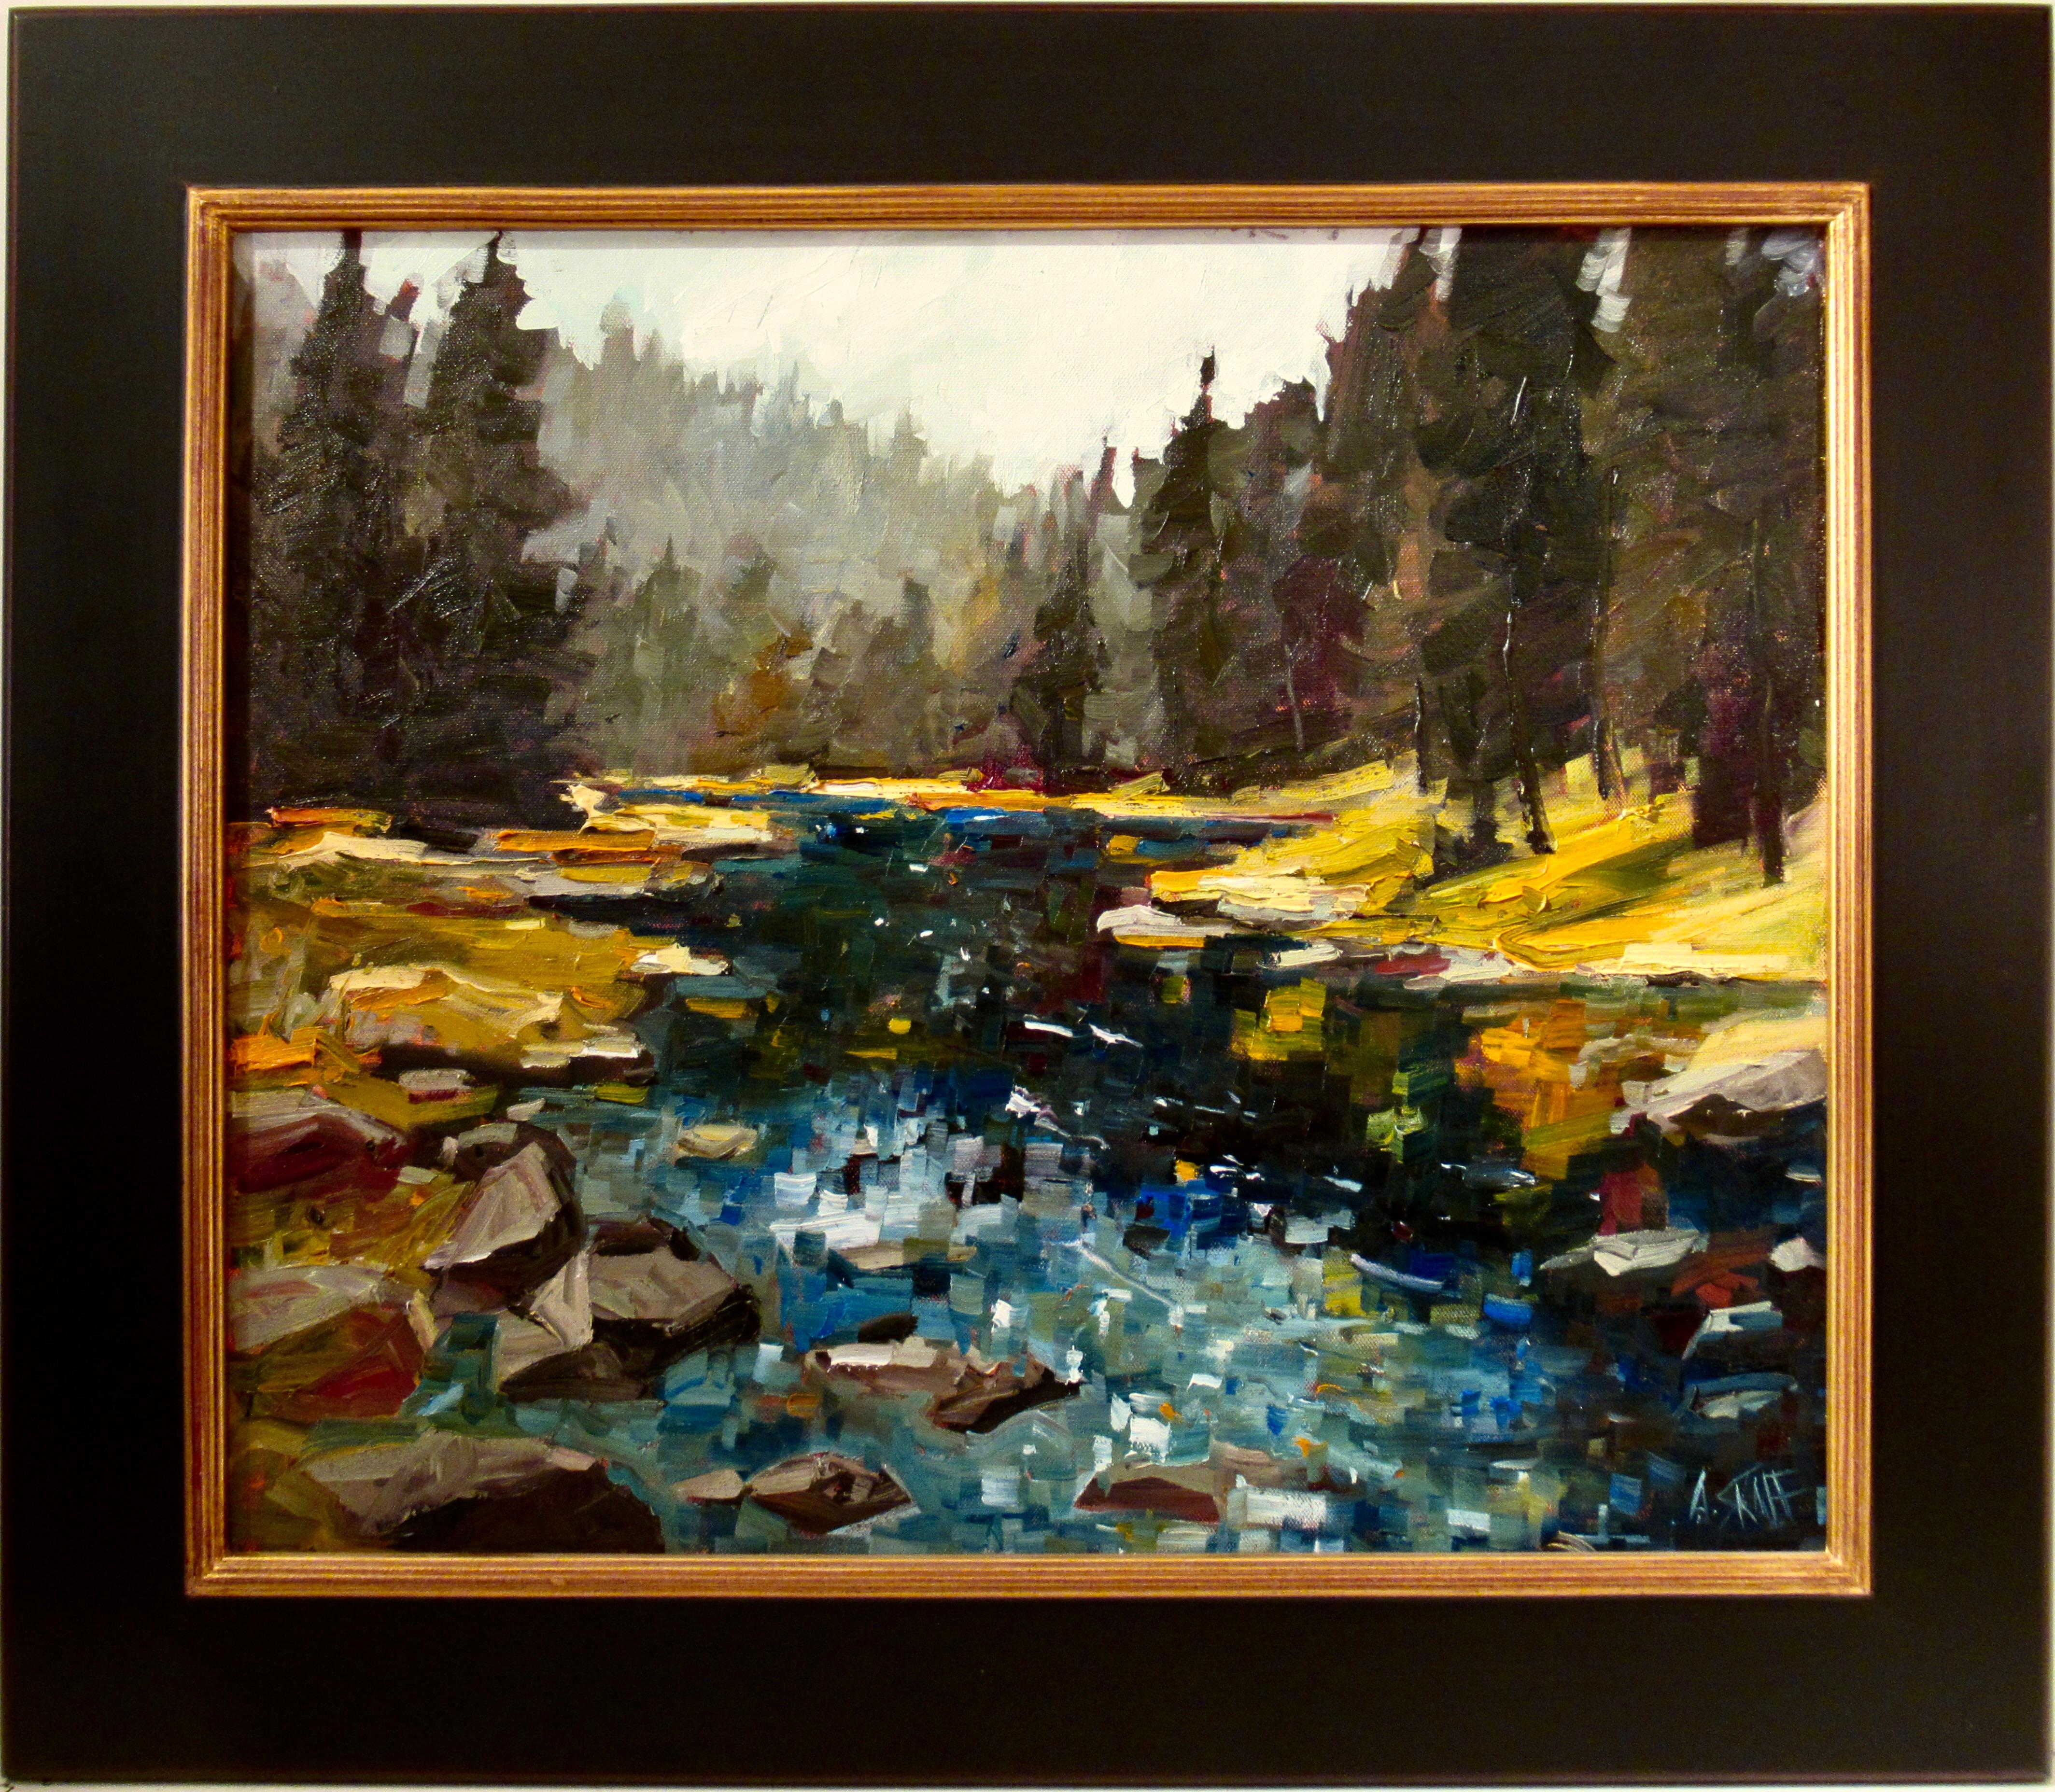 Andrew (Andy) Skaff Figurative Painting - River Colors V (Lake Tahoe)